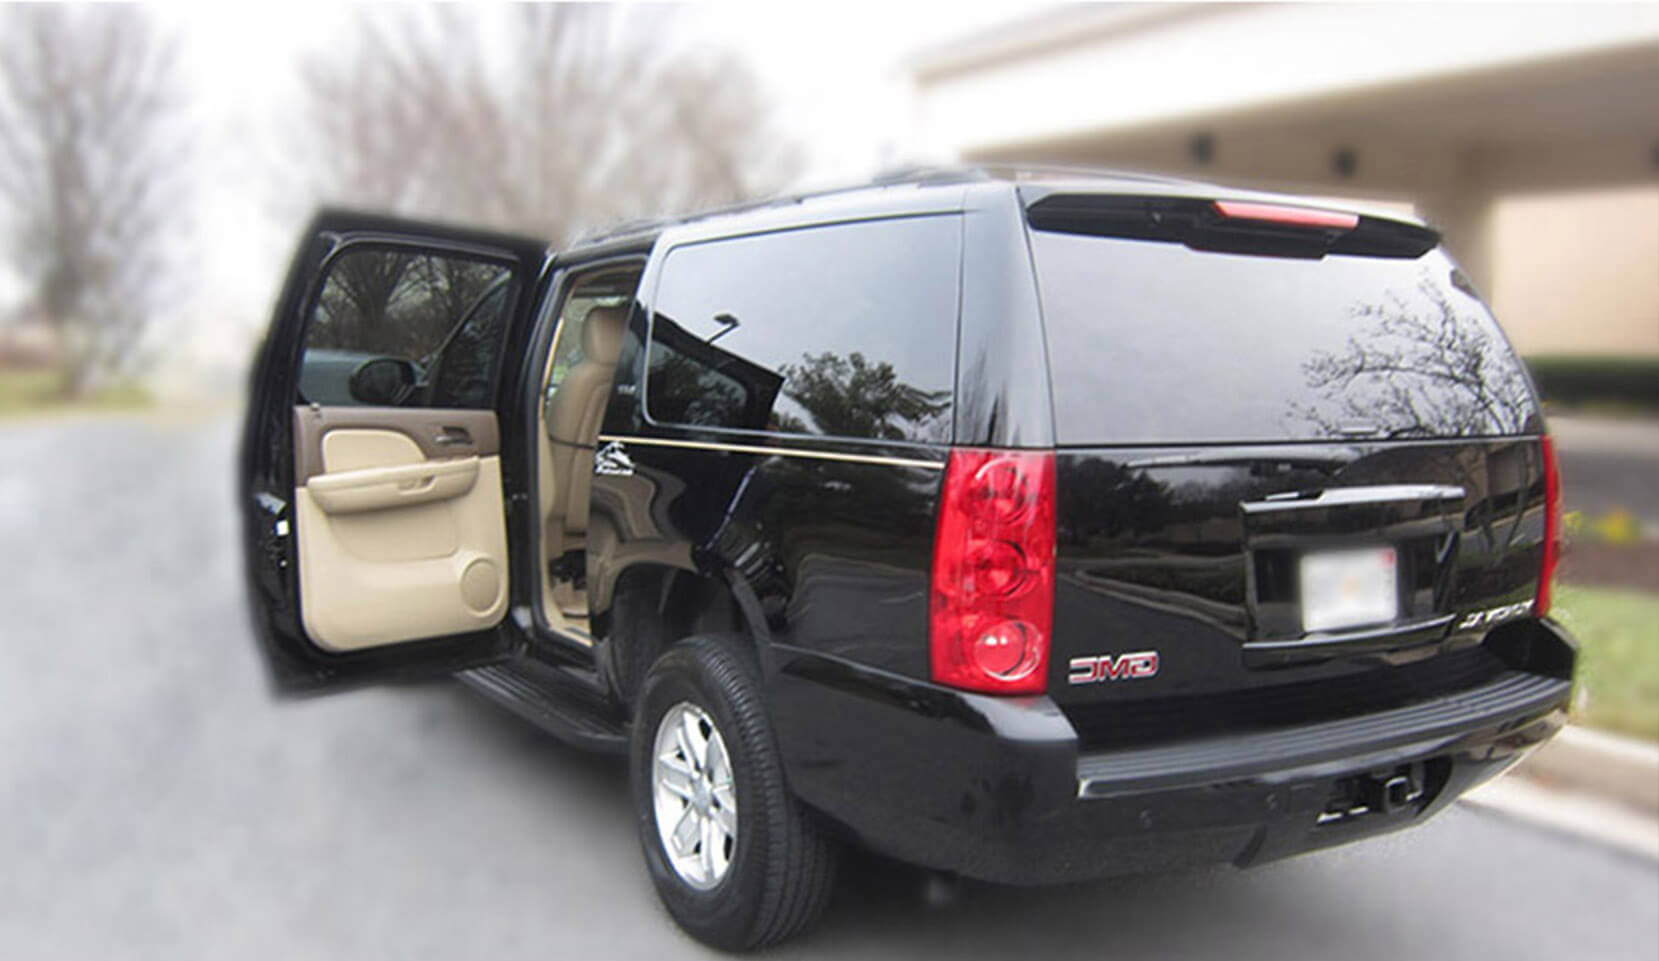 Luxurious black SUV truck provided by CLS Black Car Service in Baltimore